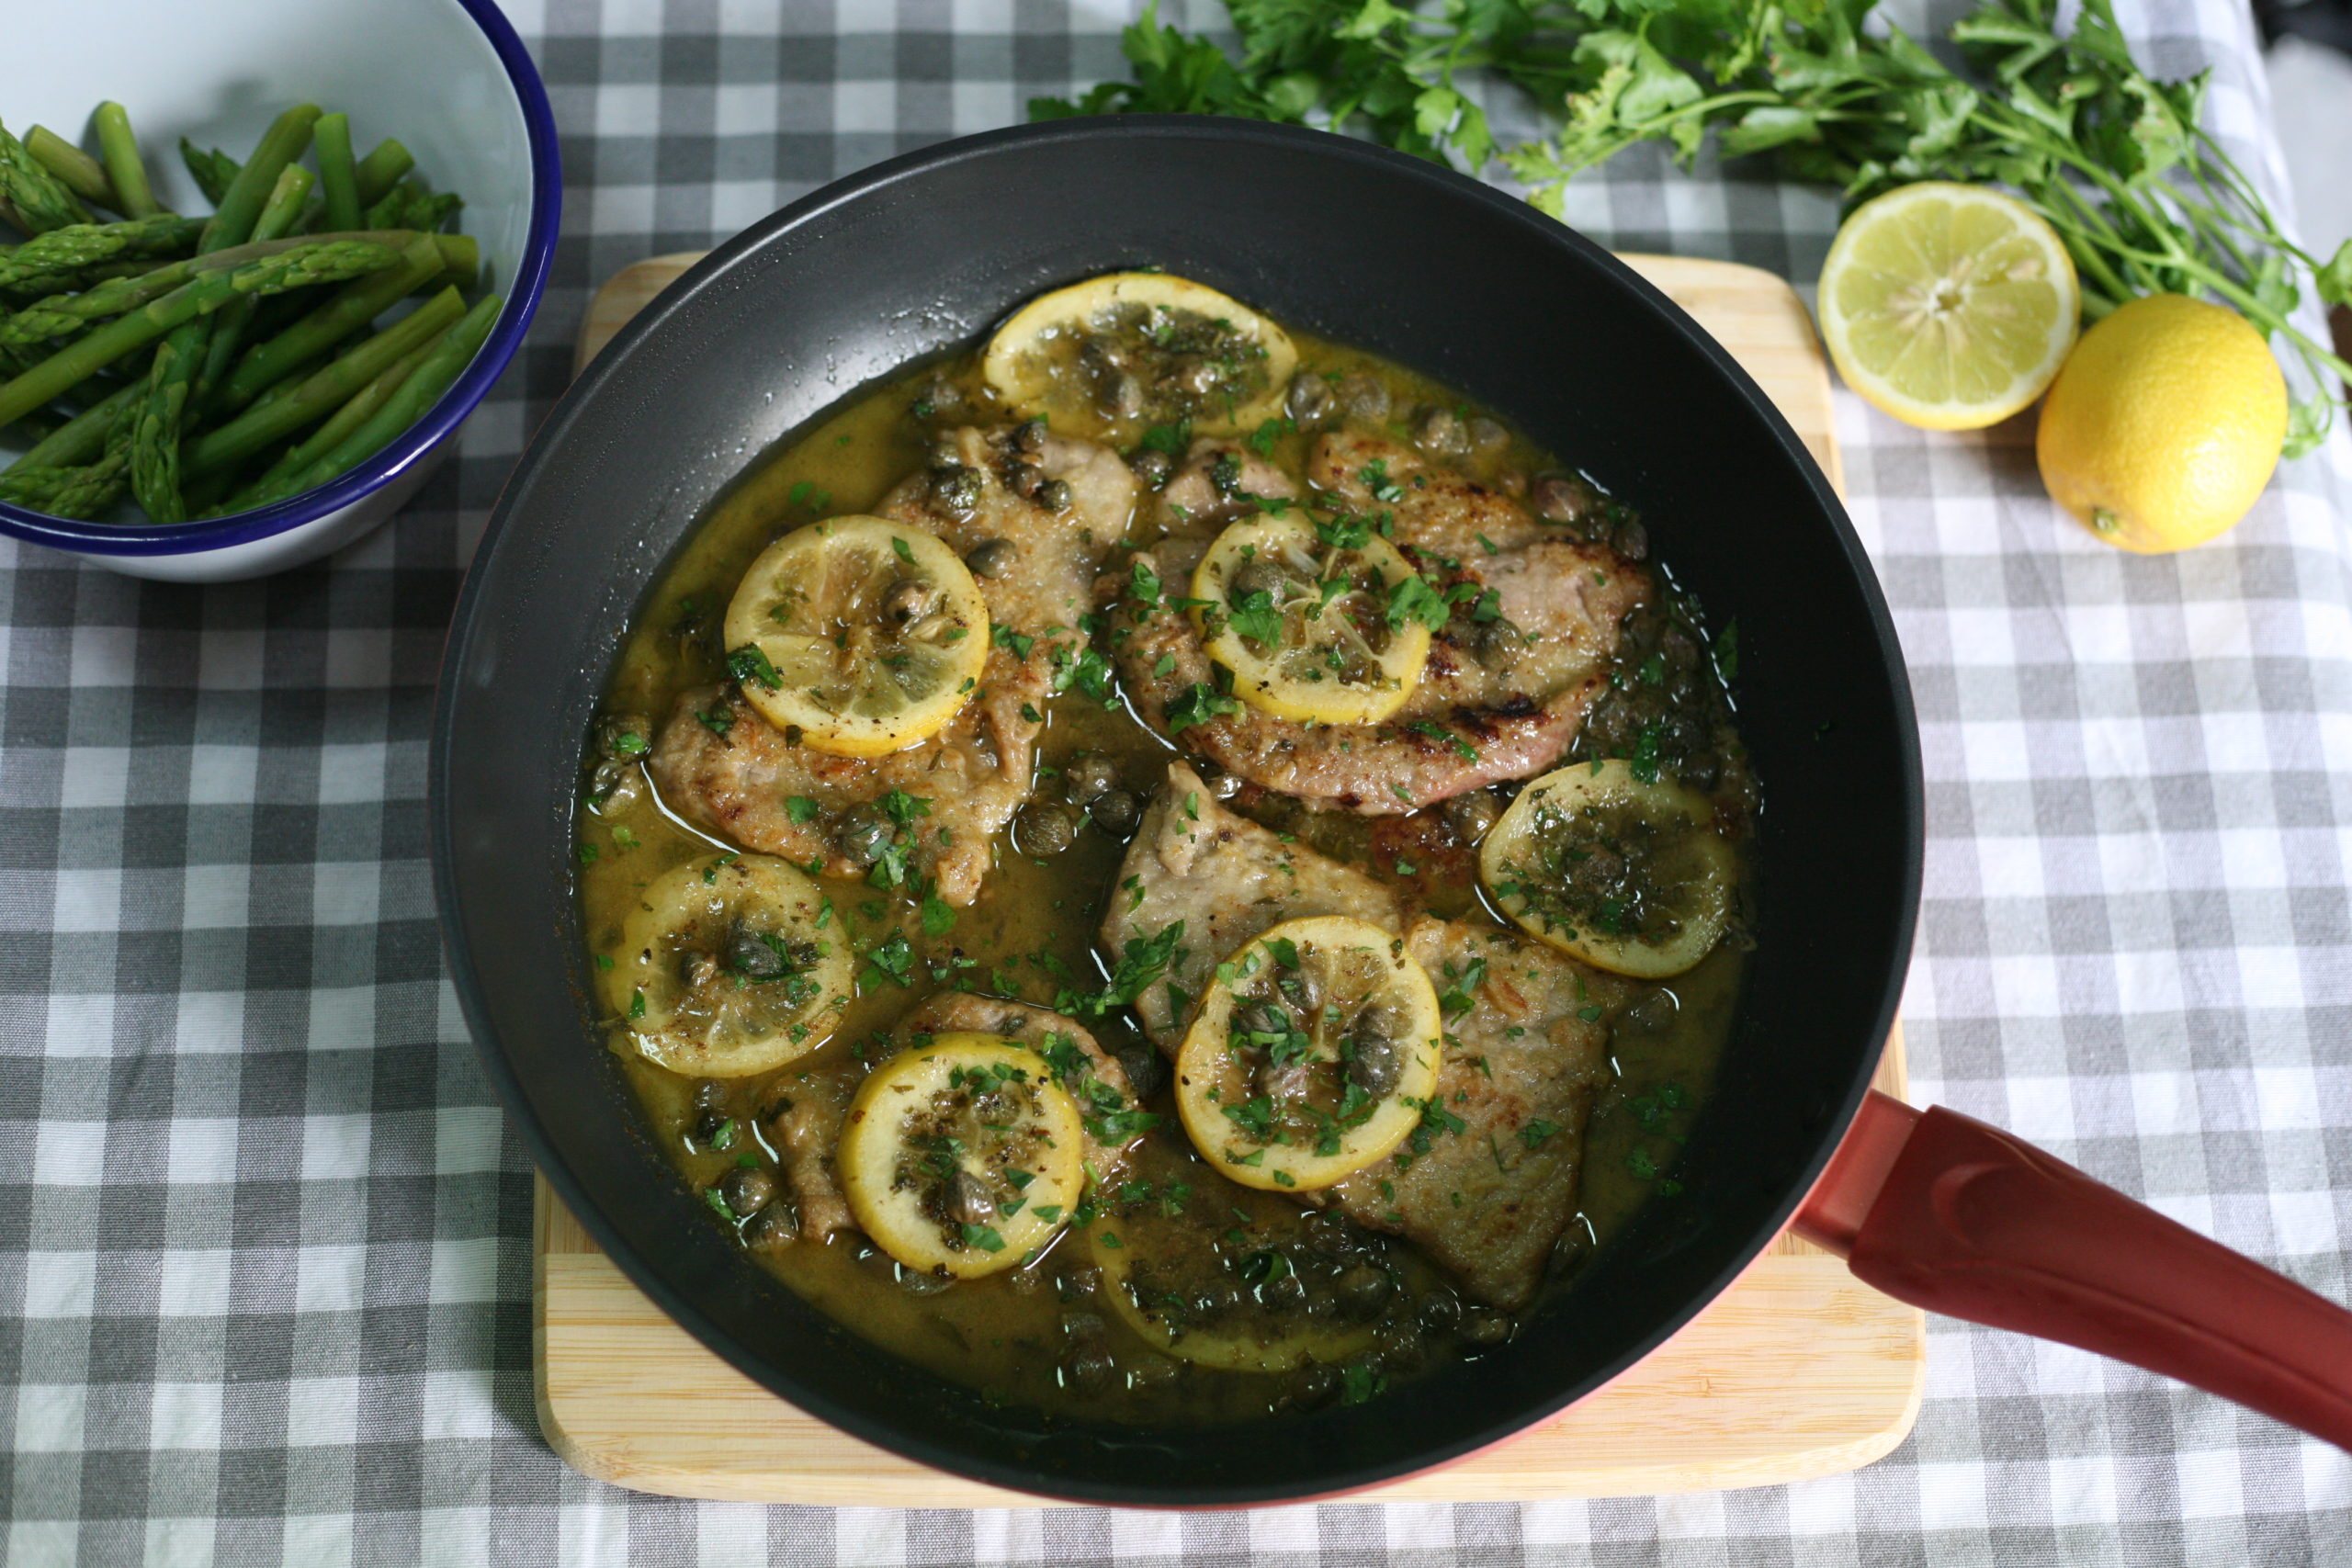 Veal escalopes in lemon and caper sauce